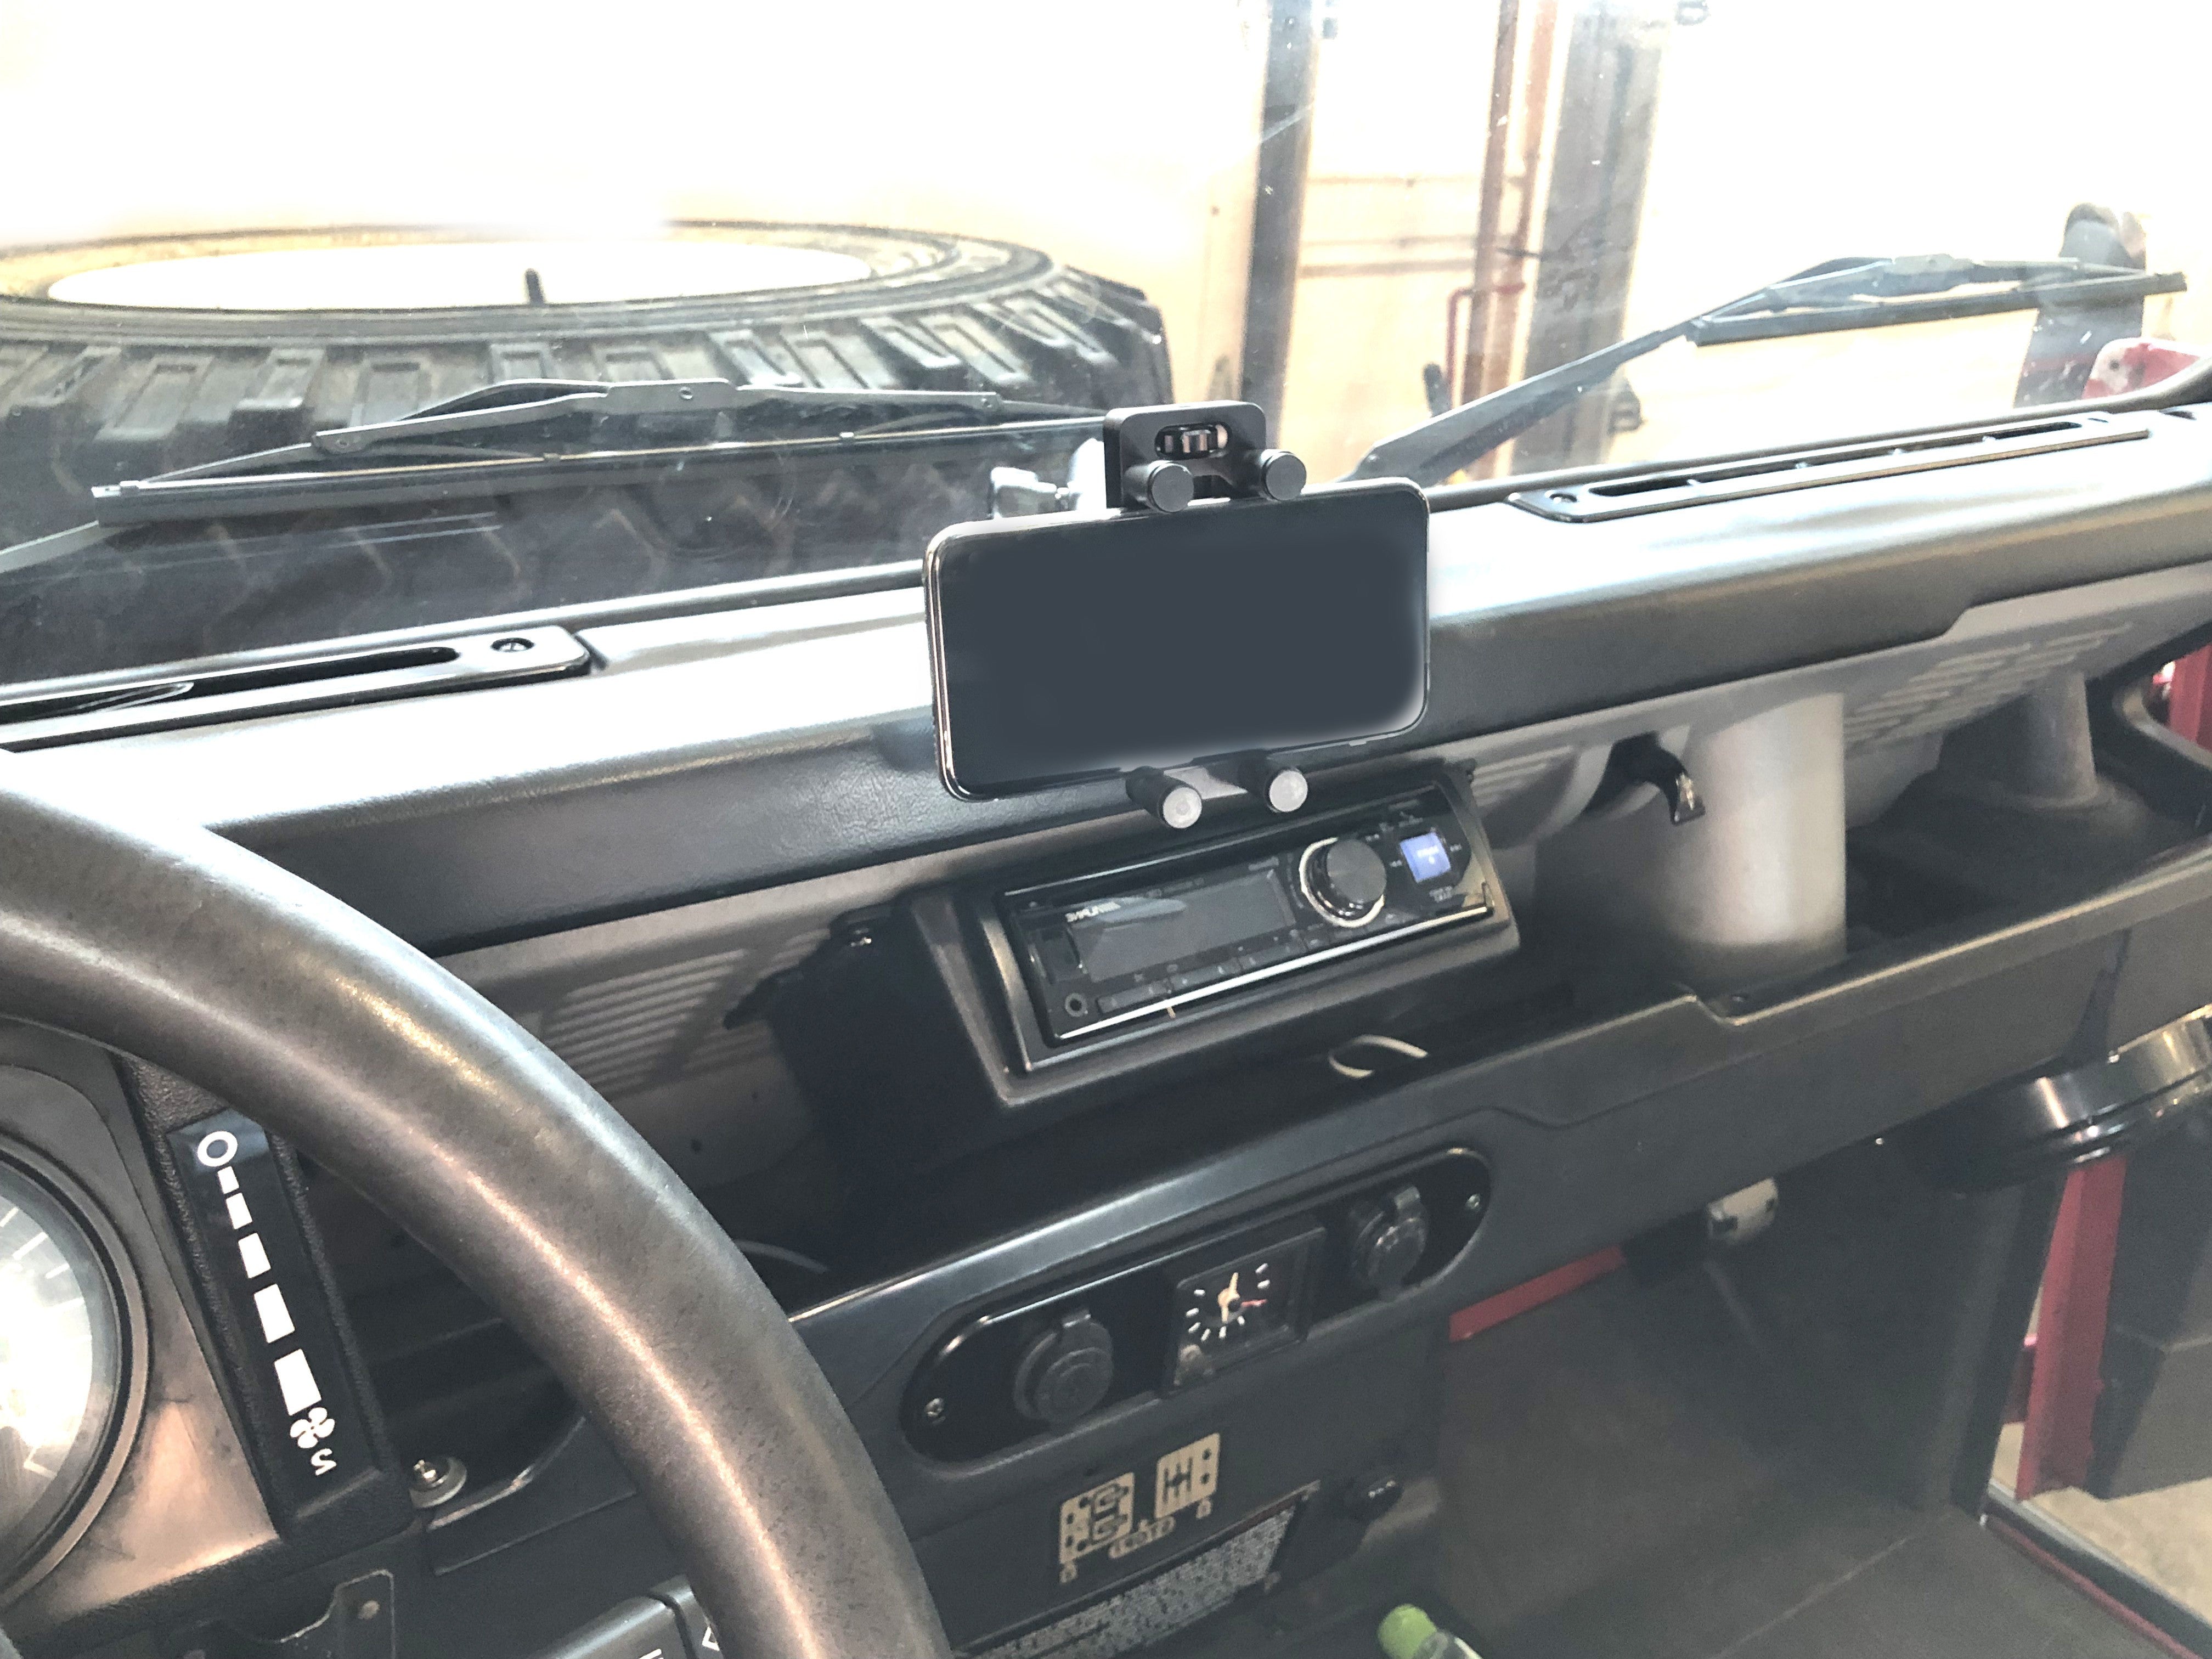 Defender Phone Dash Mount, aluminum (fits model years 1983-2006) - for Land Rover 90/110/130